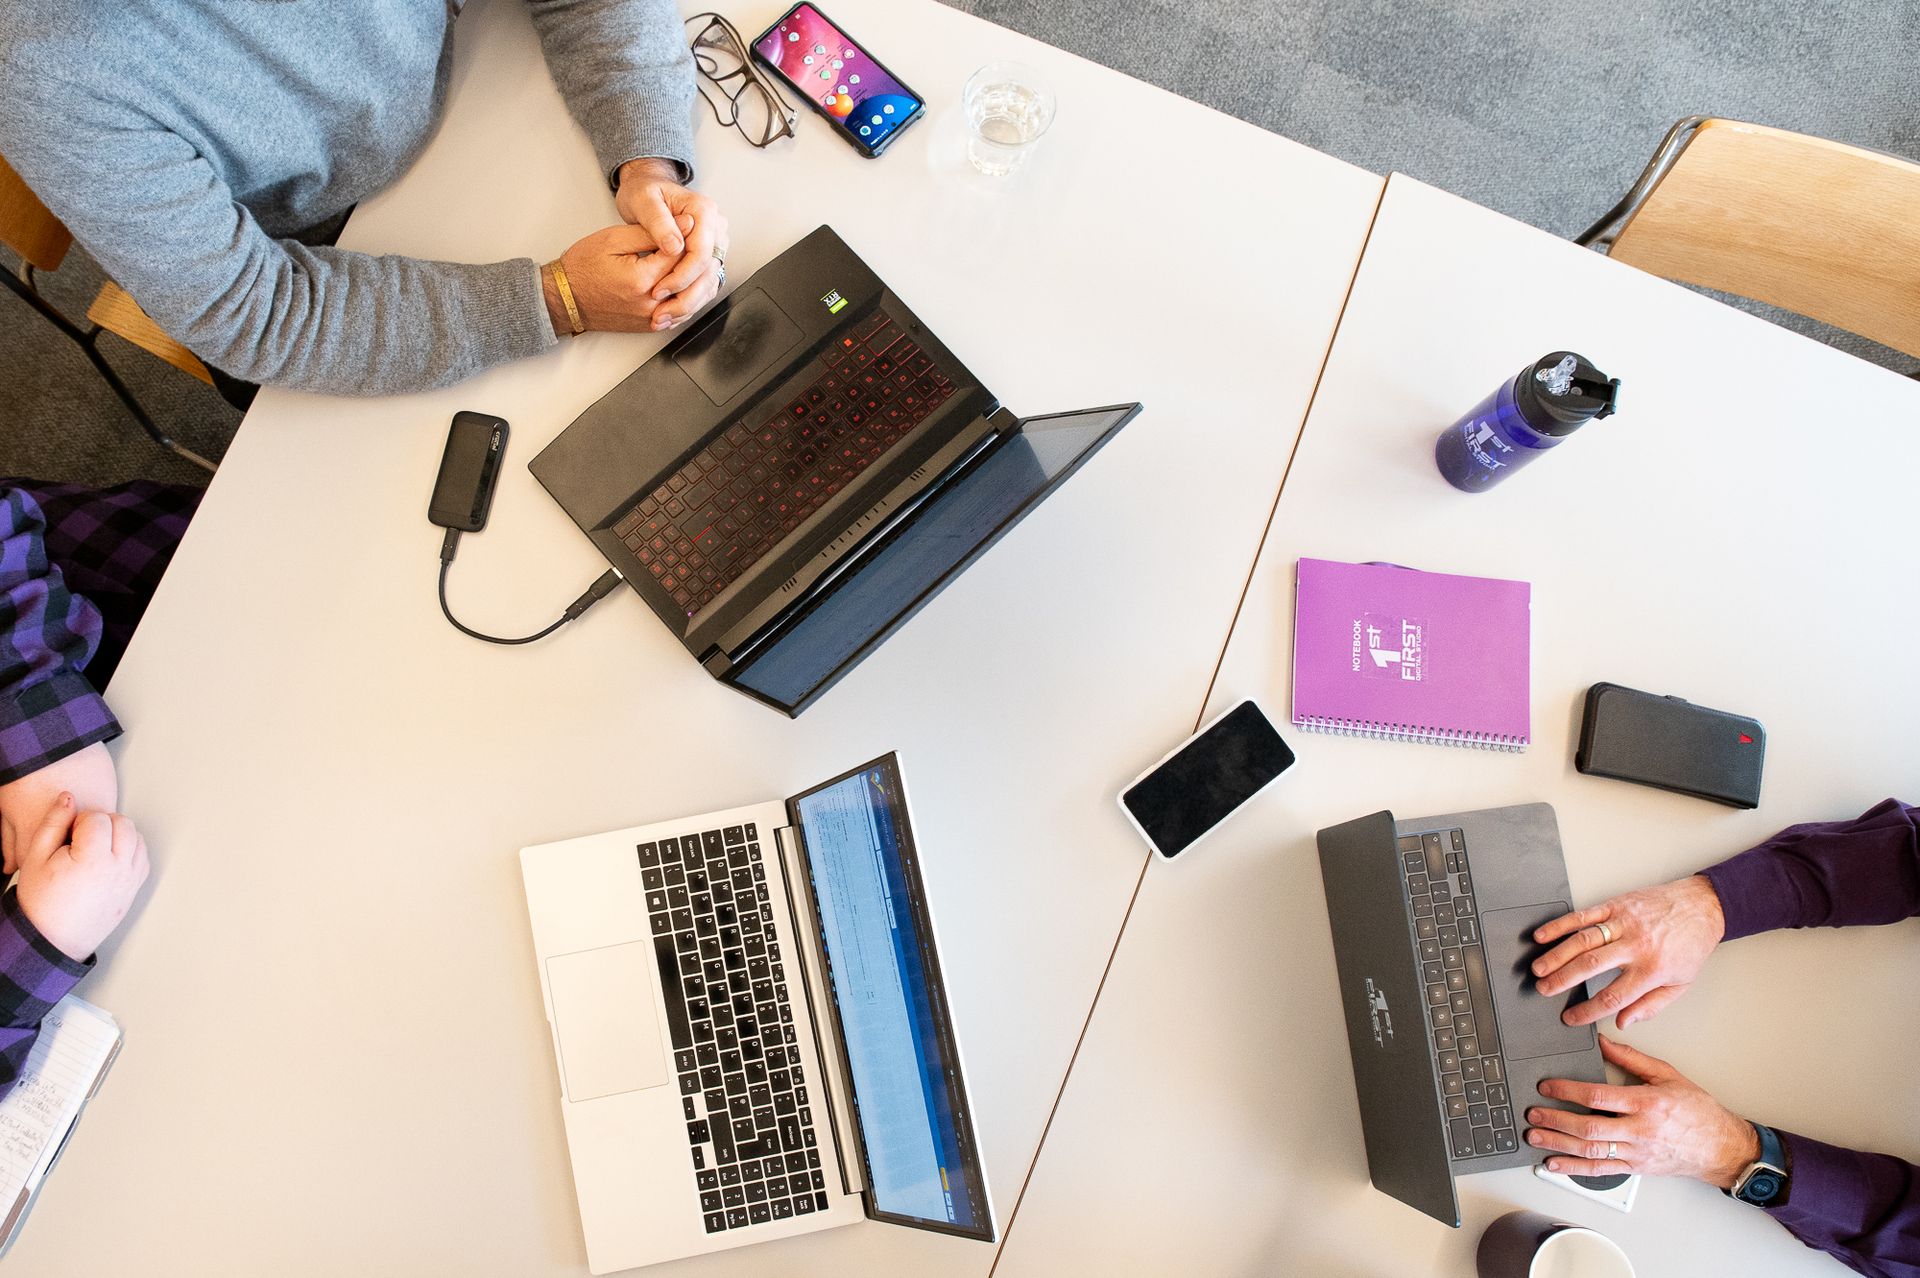 a purple notebook with the words First Digital Studio on it sits on a table with 3 laptops displaying digital marketing reports